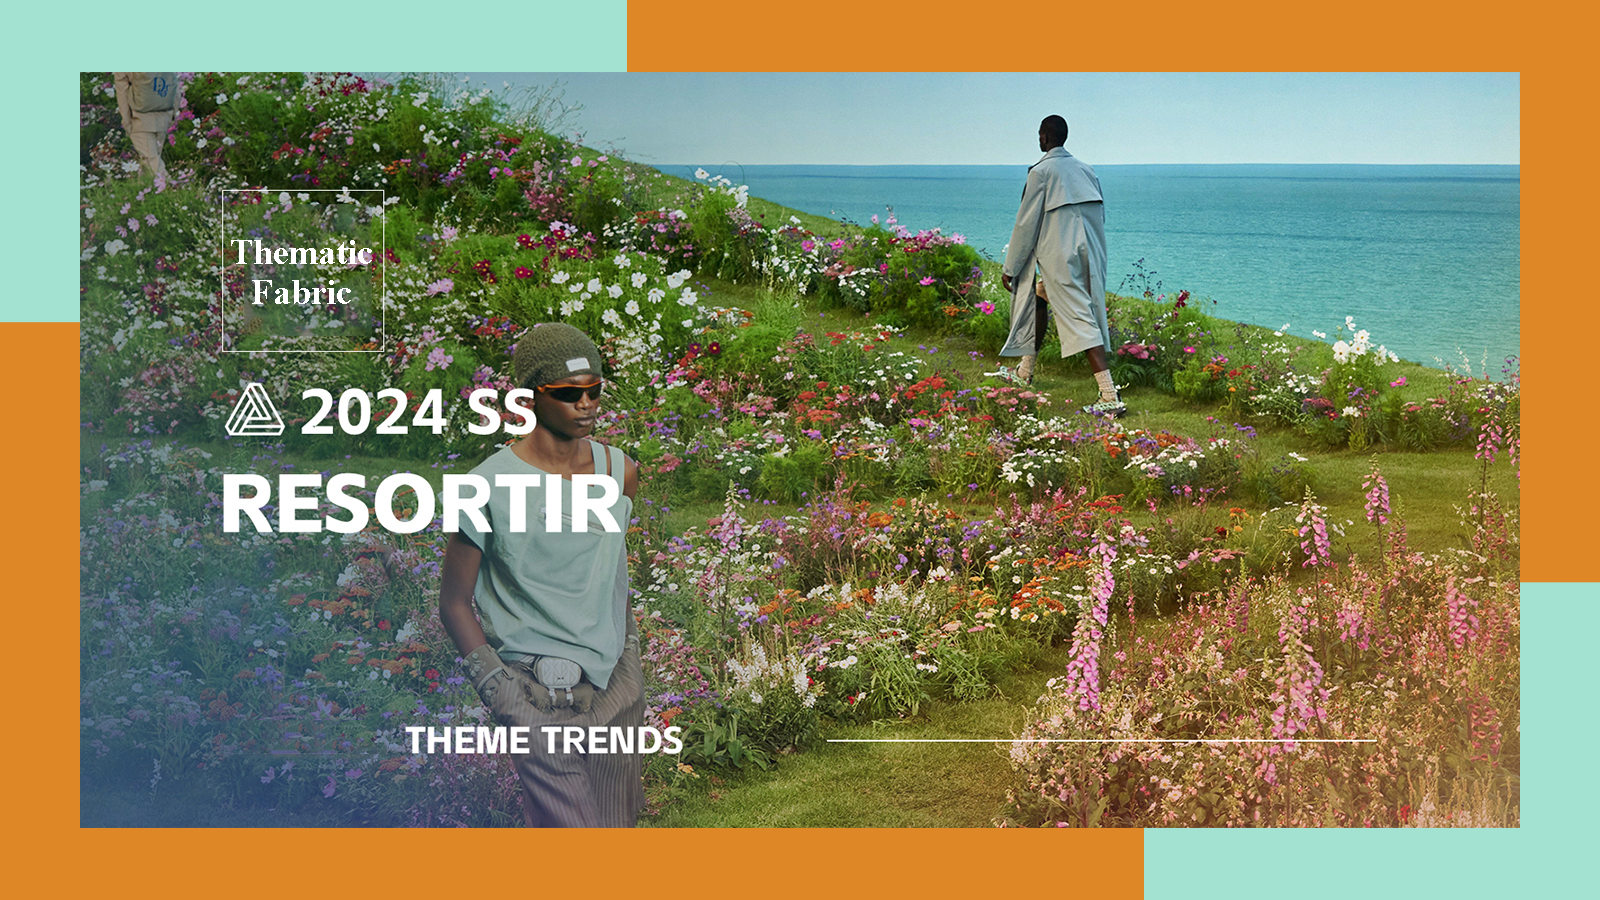 Resortir -- The S/S 2024 Thematic Fabric Trend